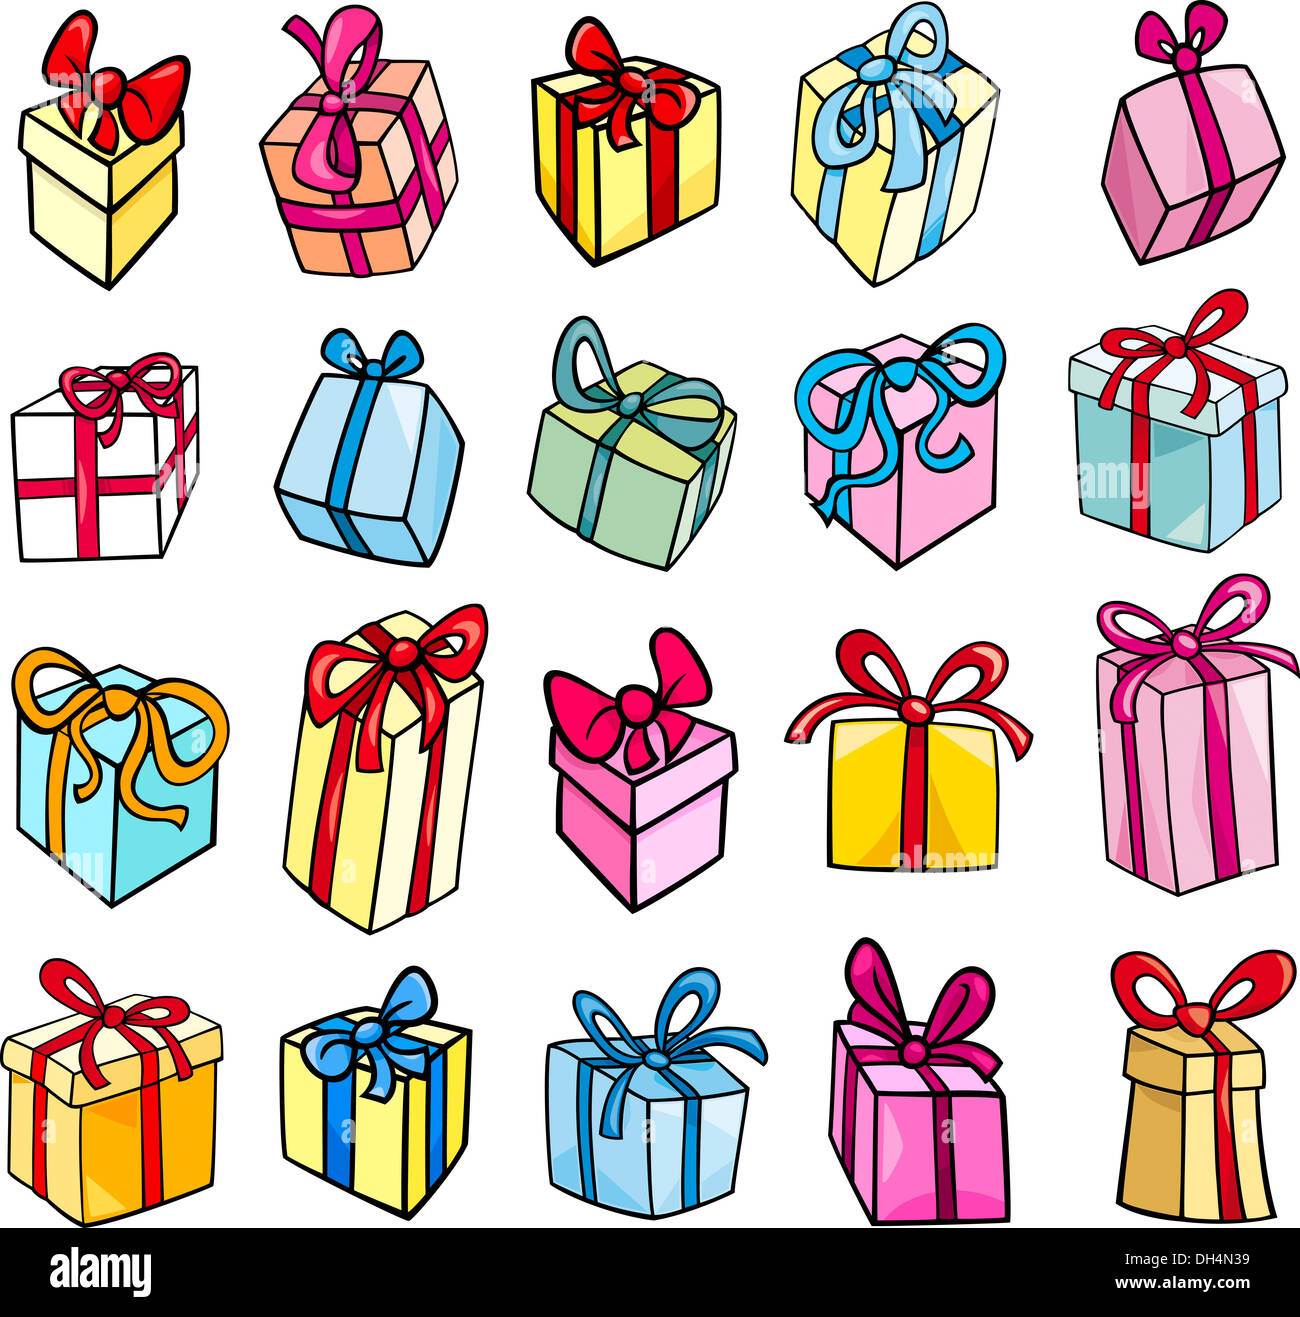 Cartoon Illustration of Christmas or Birthday Presents or Gifts Objects Clip  Art Set Stock Photo - Alamy